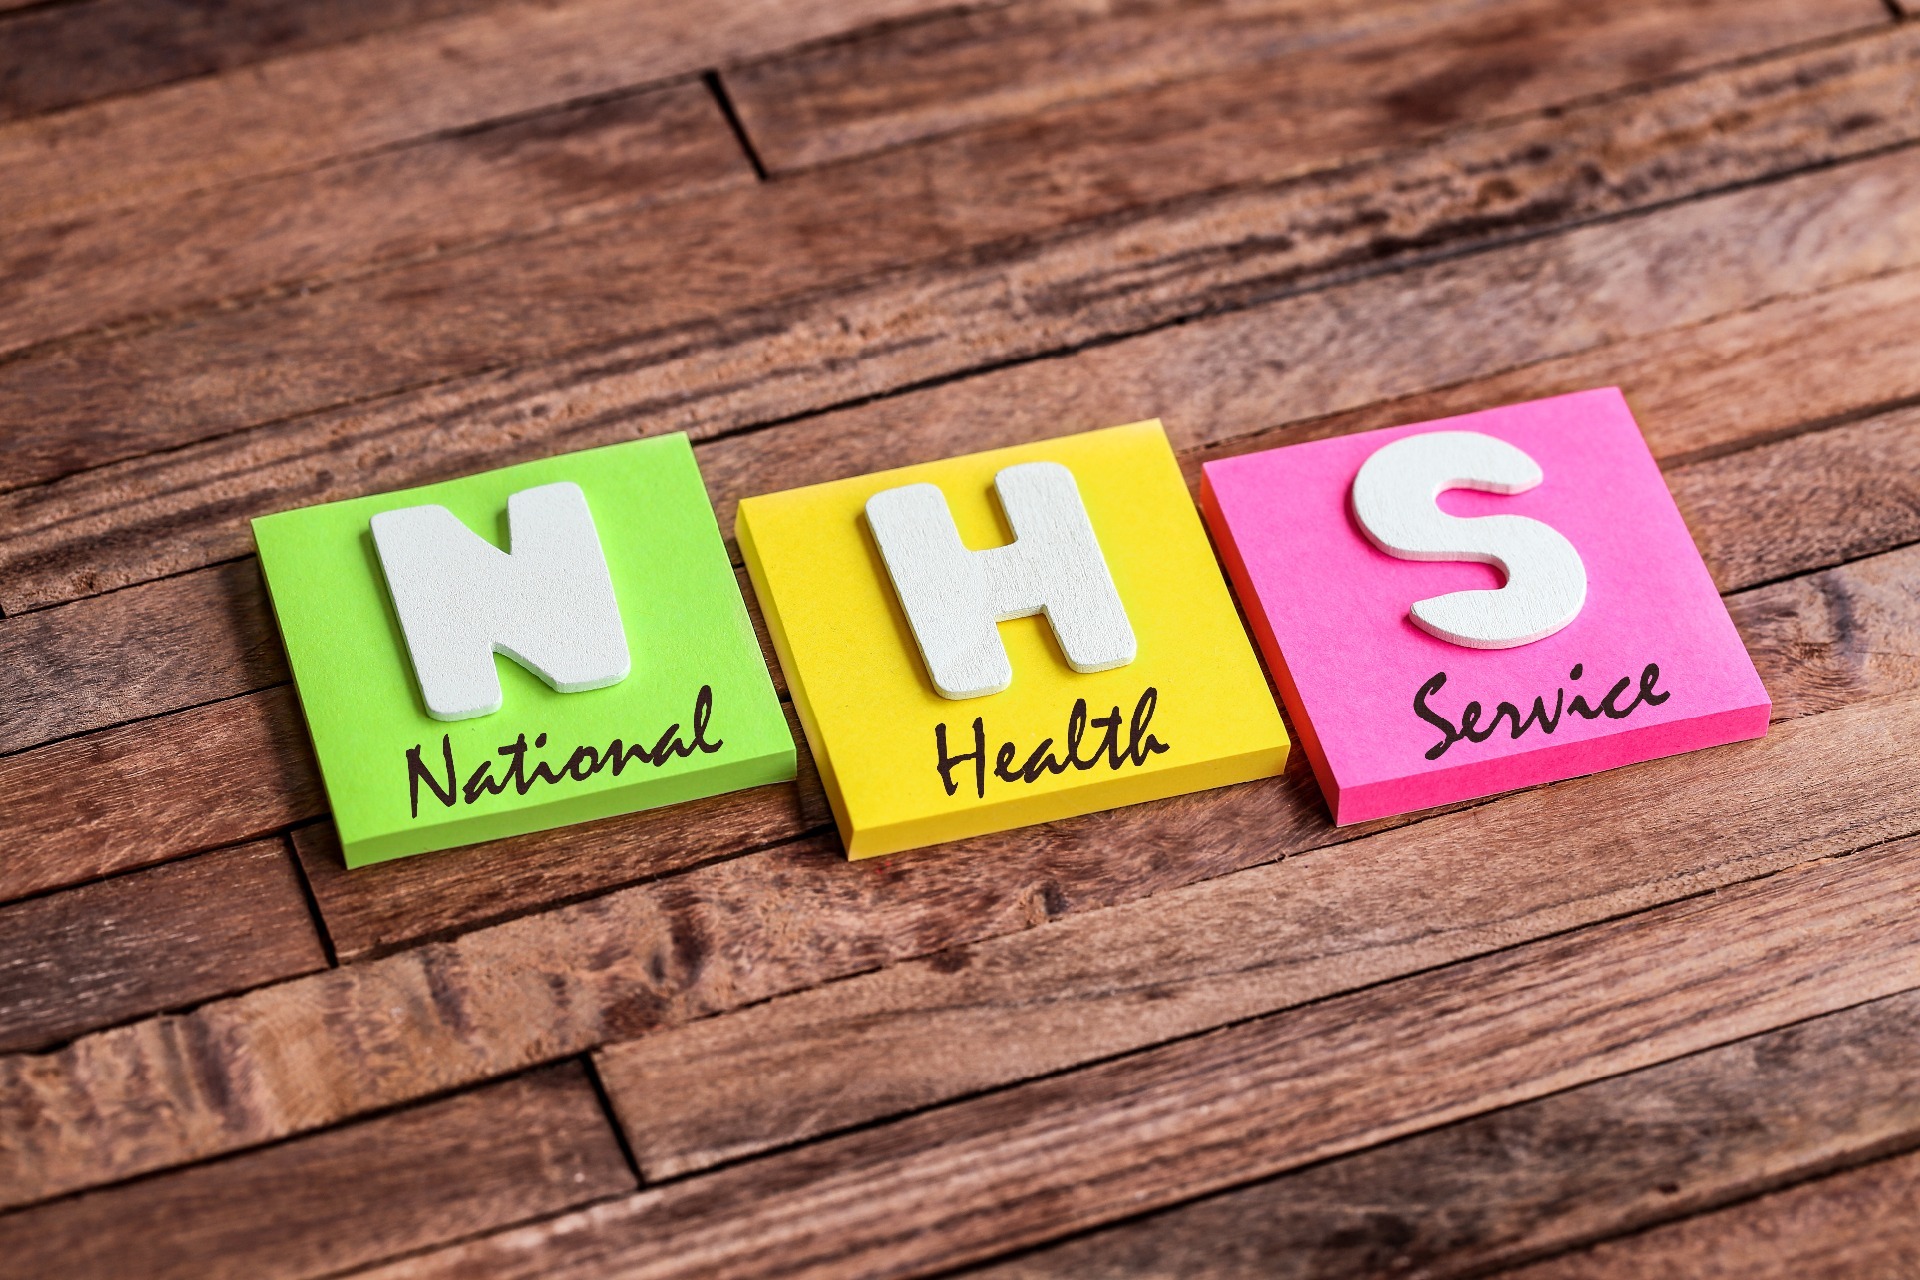 'National Health Service' on cut out squares, against a wooden background.